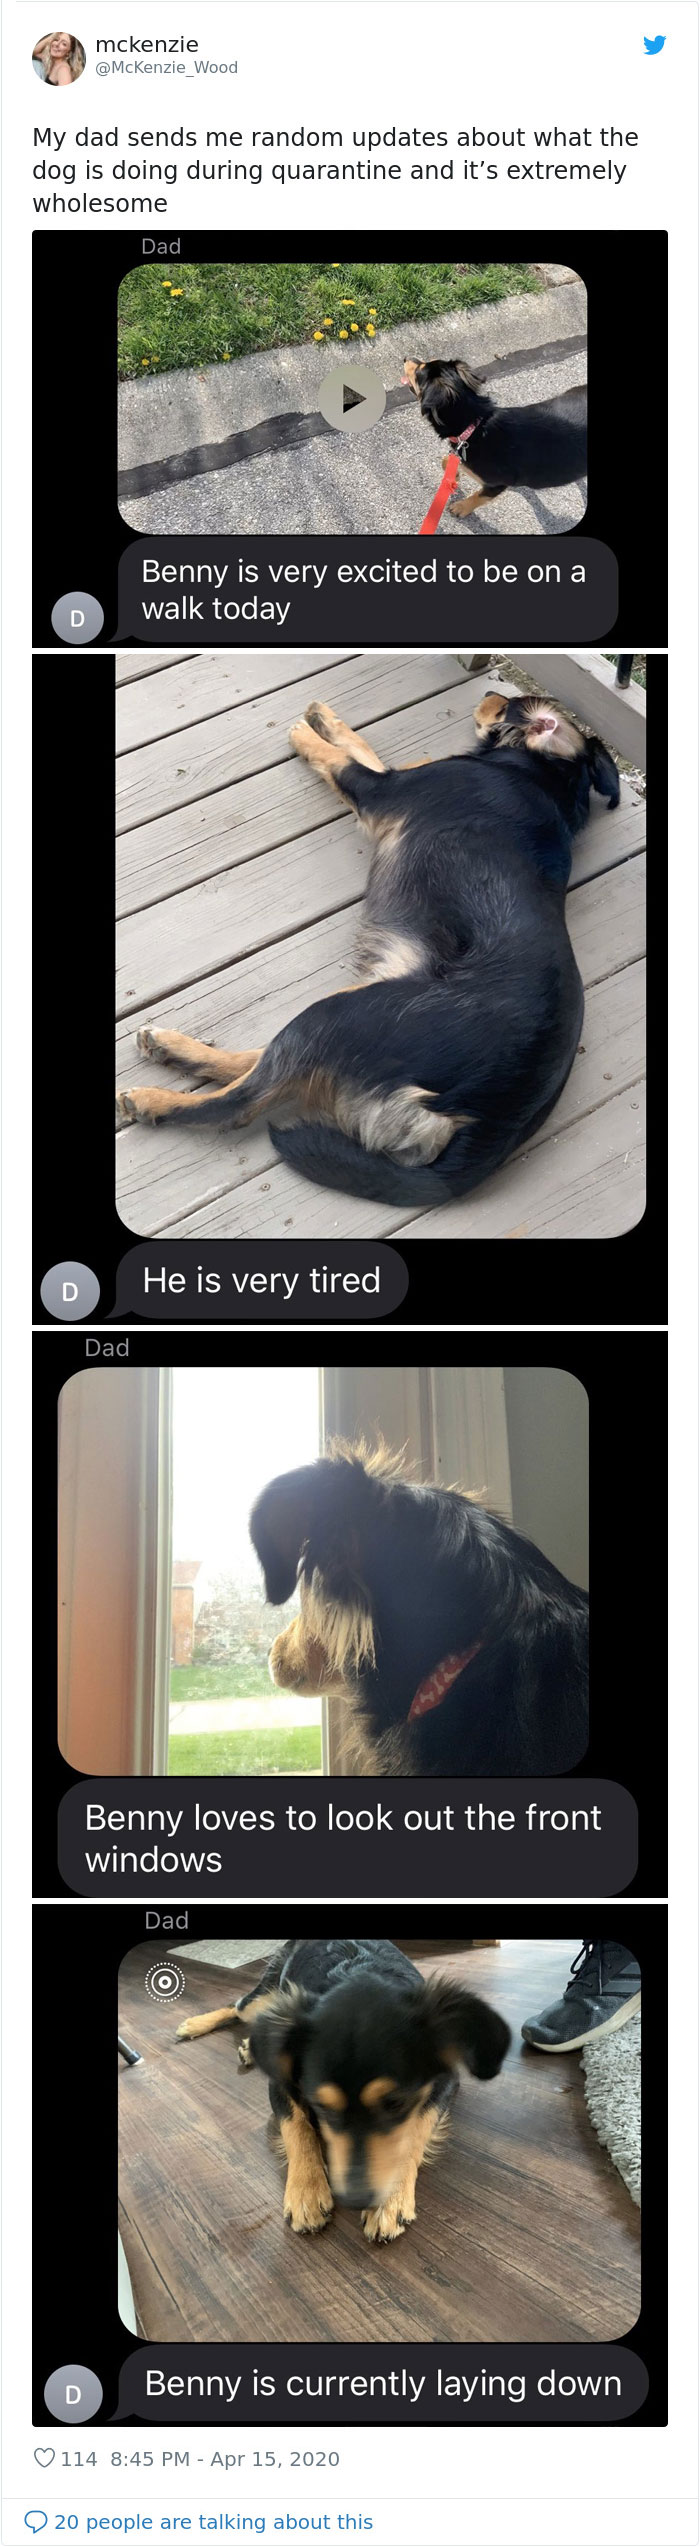 Wholesome Dad Sends Updates About The Family Dog